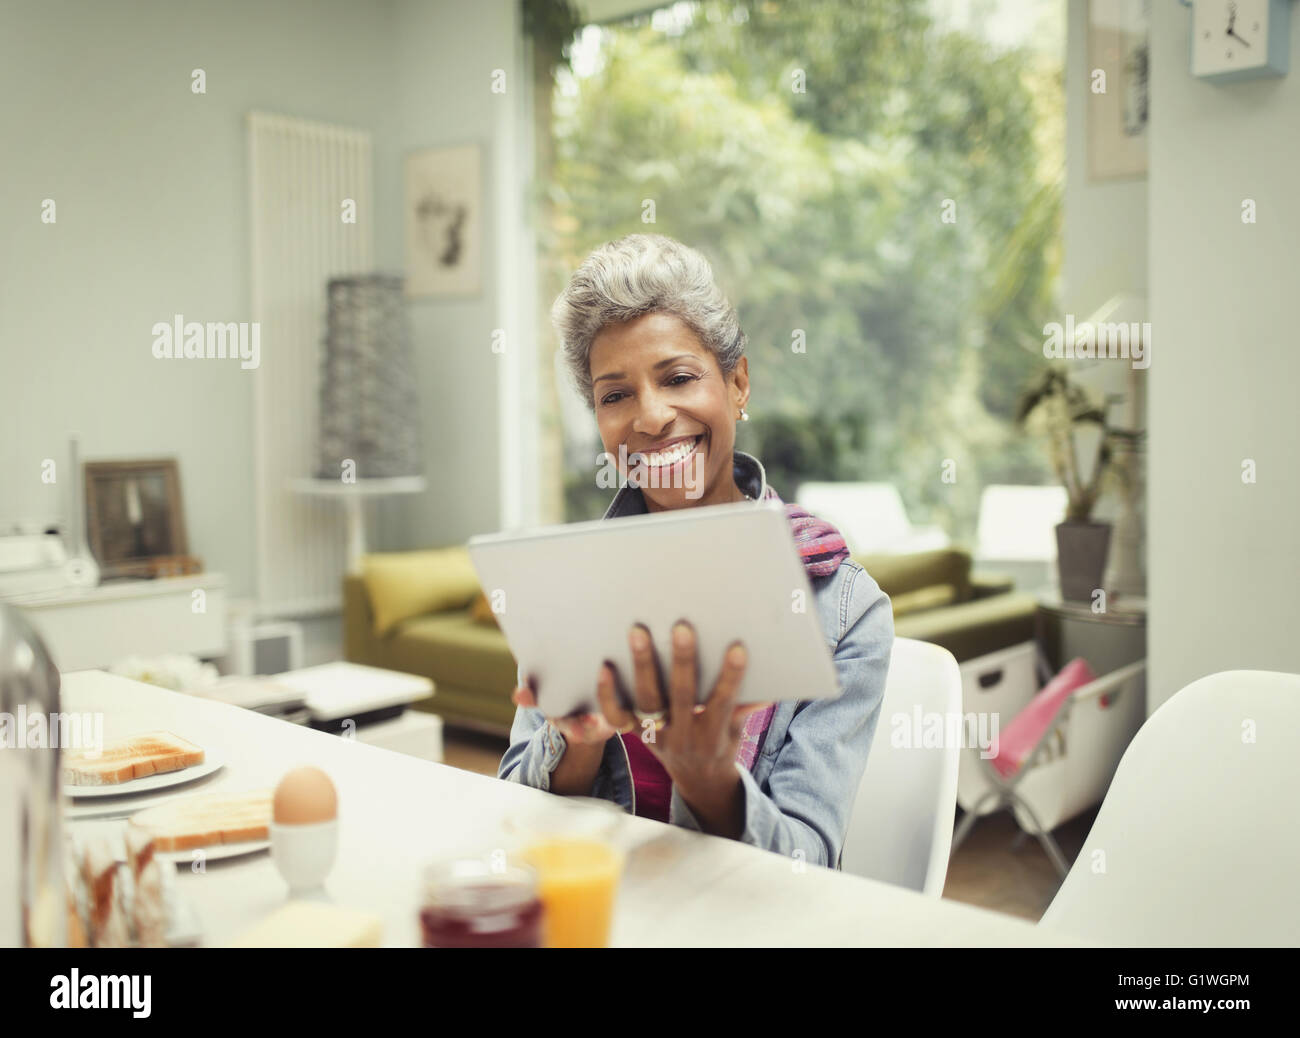 Smiling mature woman using digital tablet at breakfast table Banque D'Images